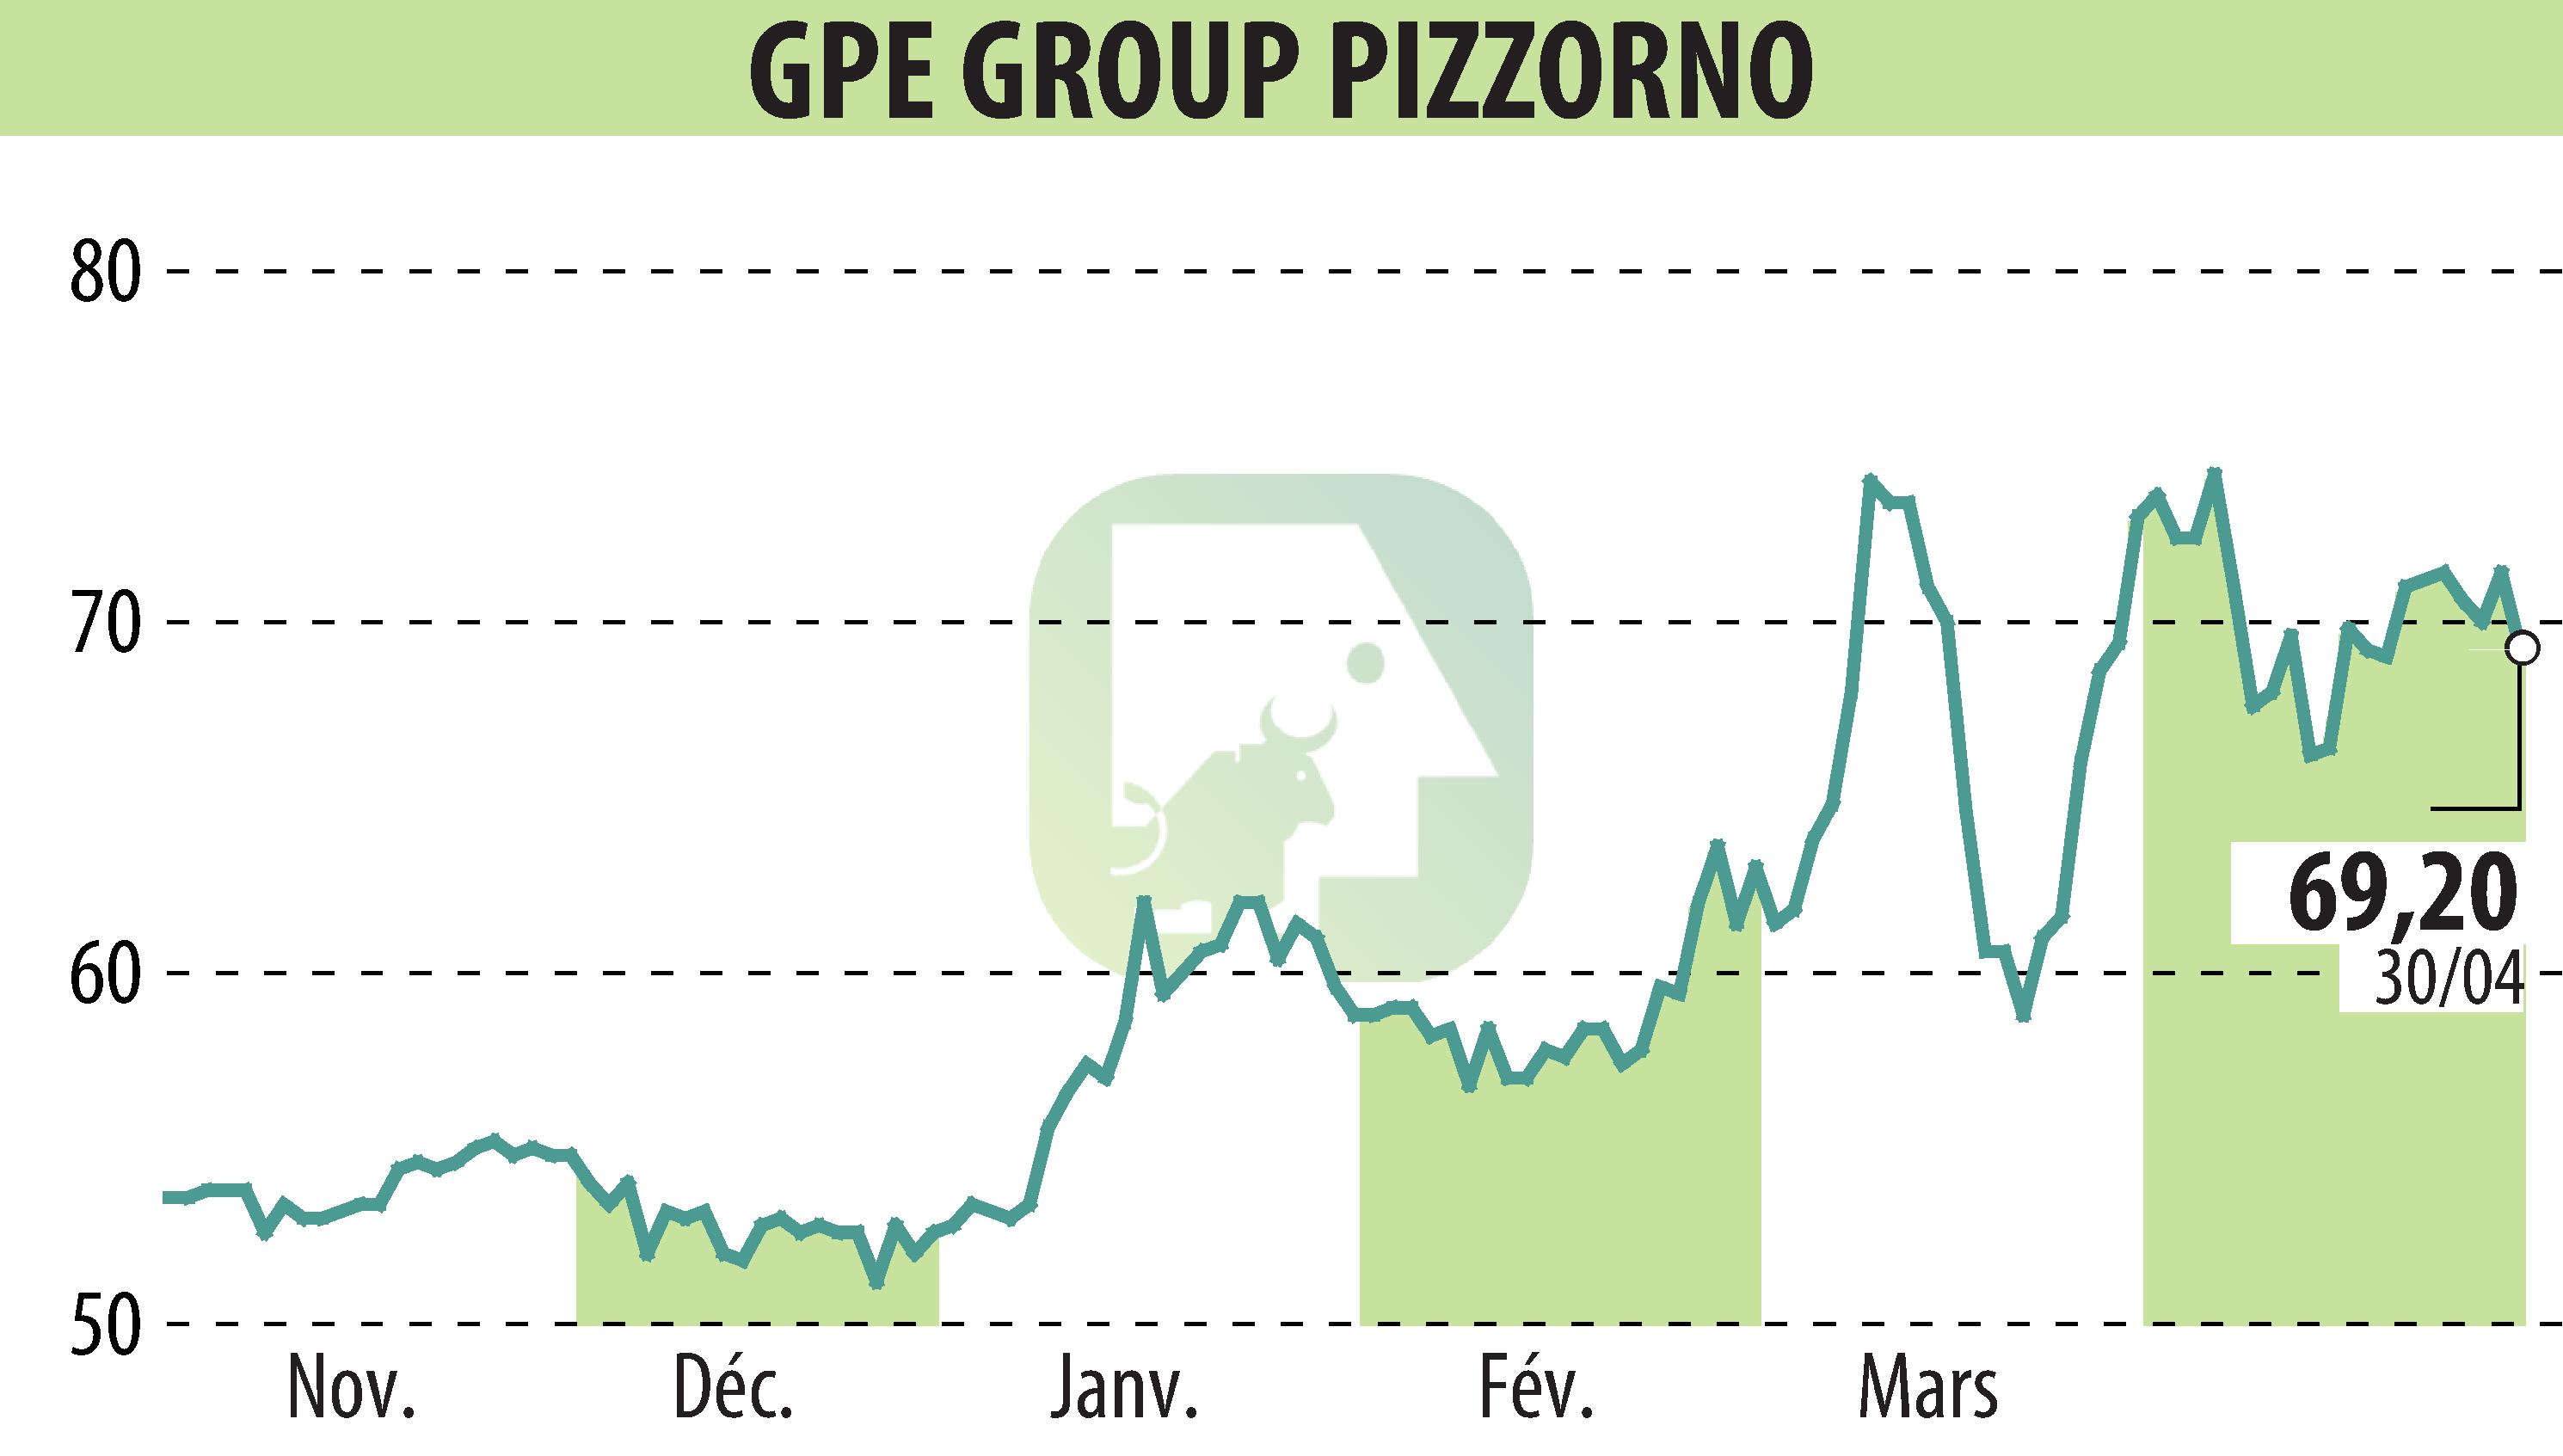 Stock price chart of PIZZORNO (EPA:GPE) showing fluctuations.